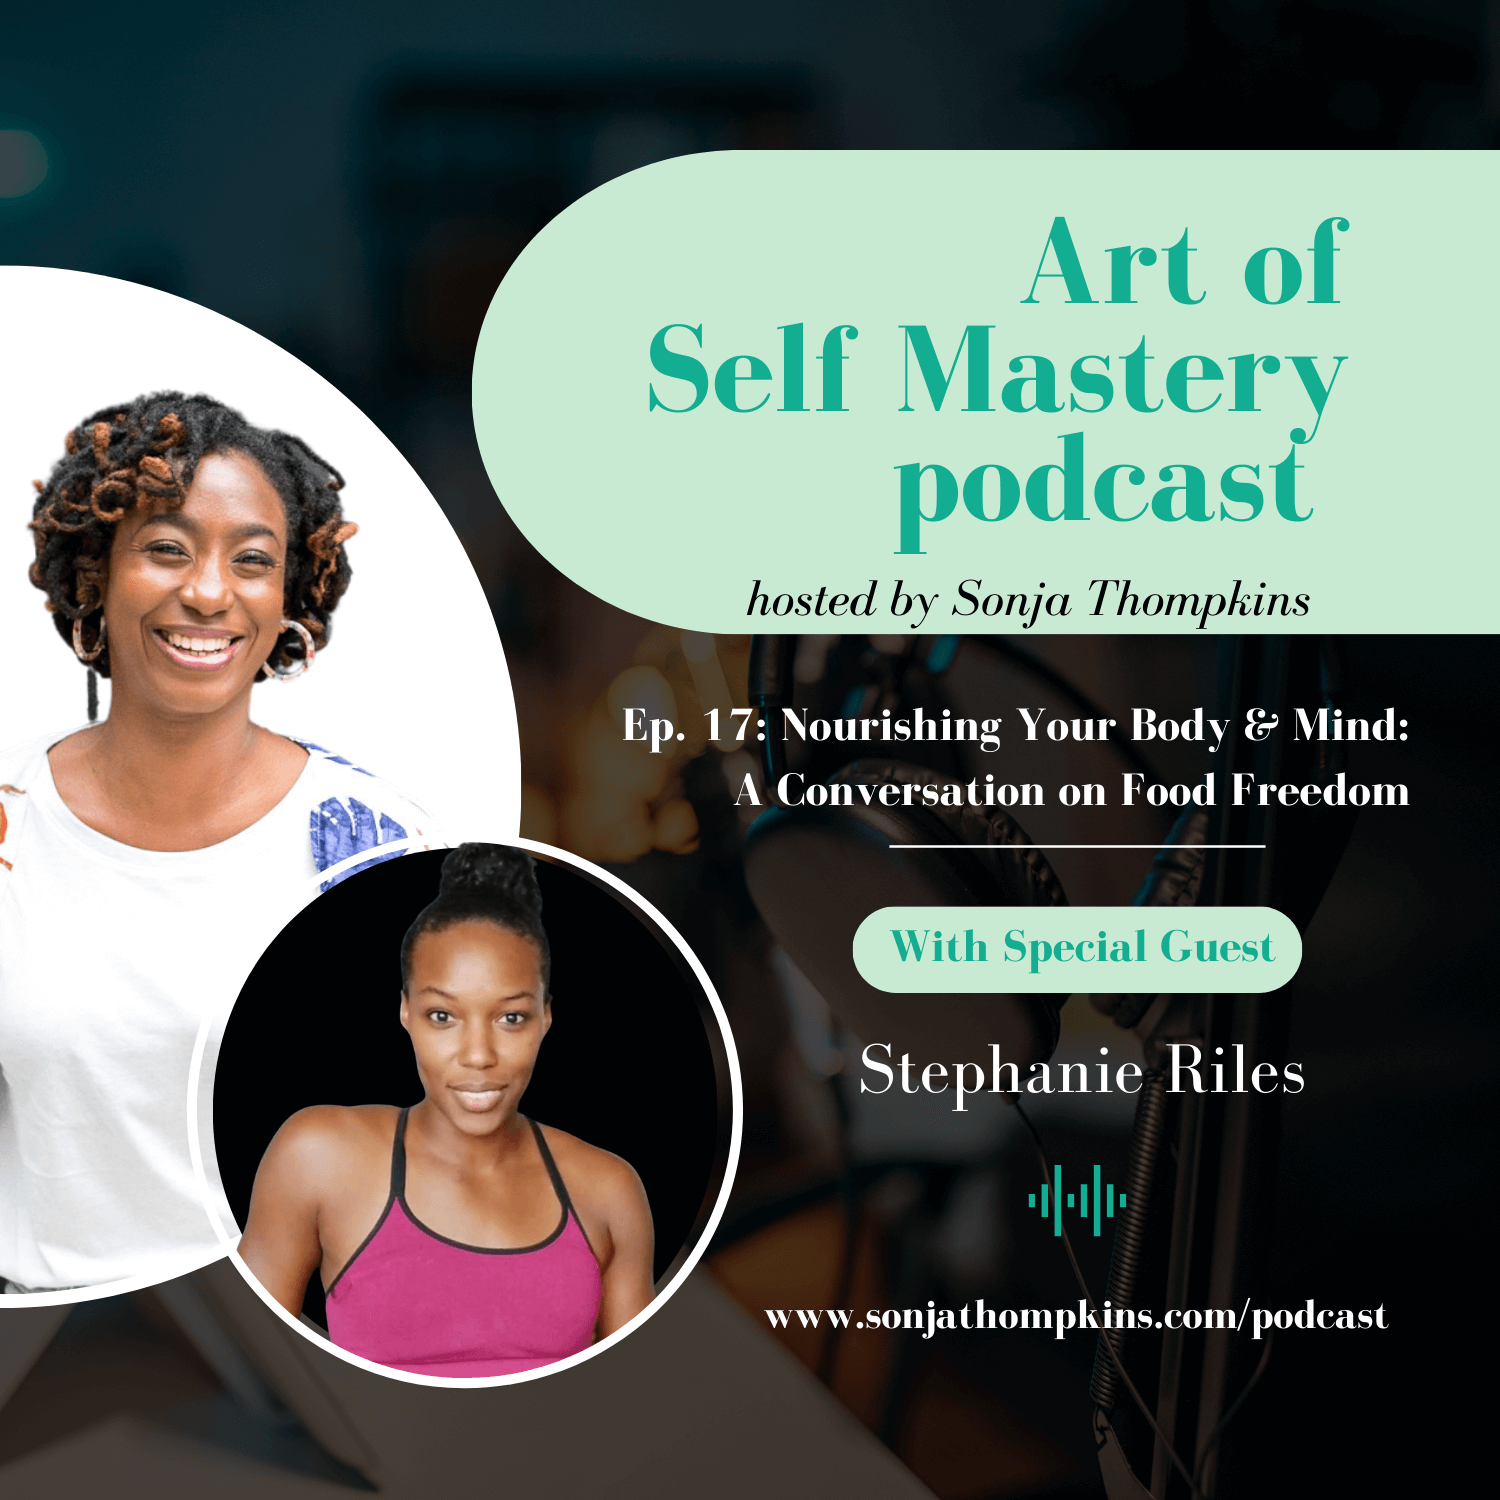 Ep. 17: Nourishing Your Body & Mind: A Conversation on Food Freedom